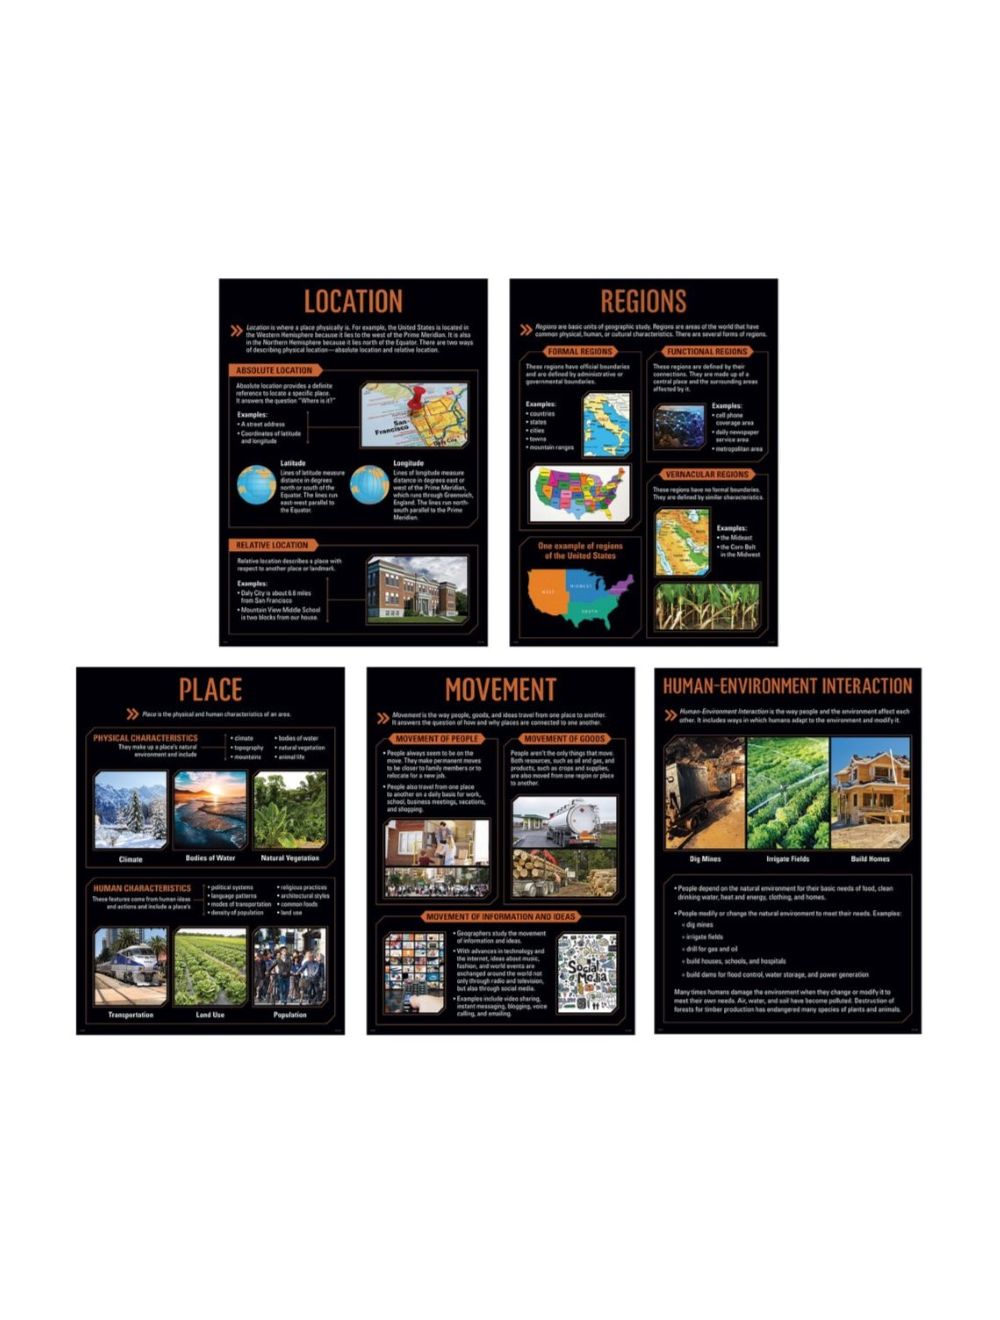 5 themes of geography travel brochure